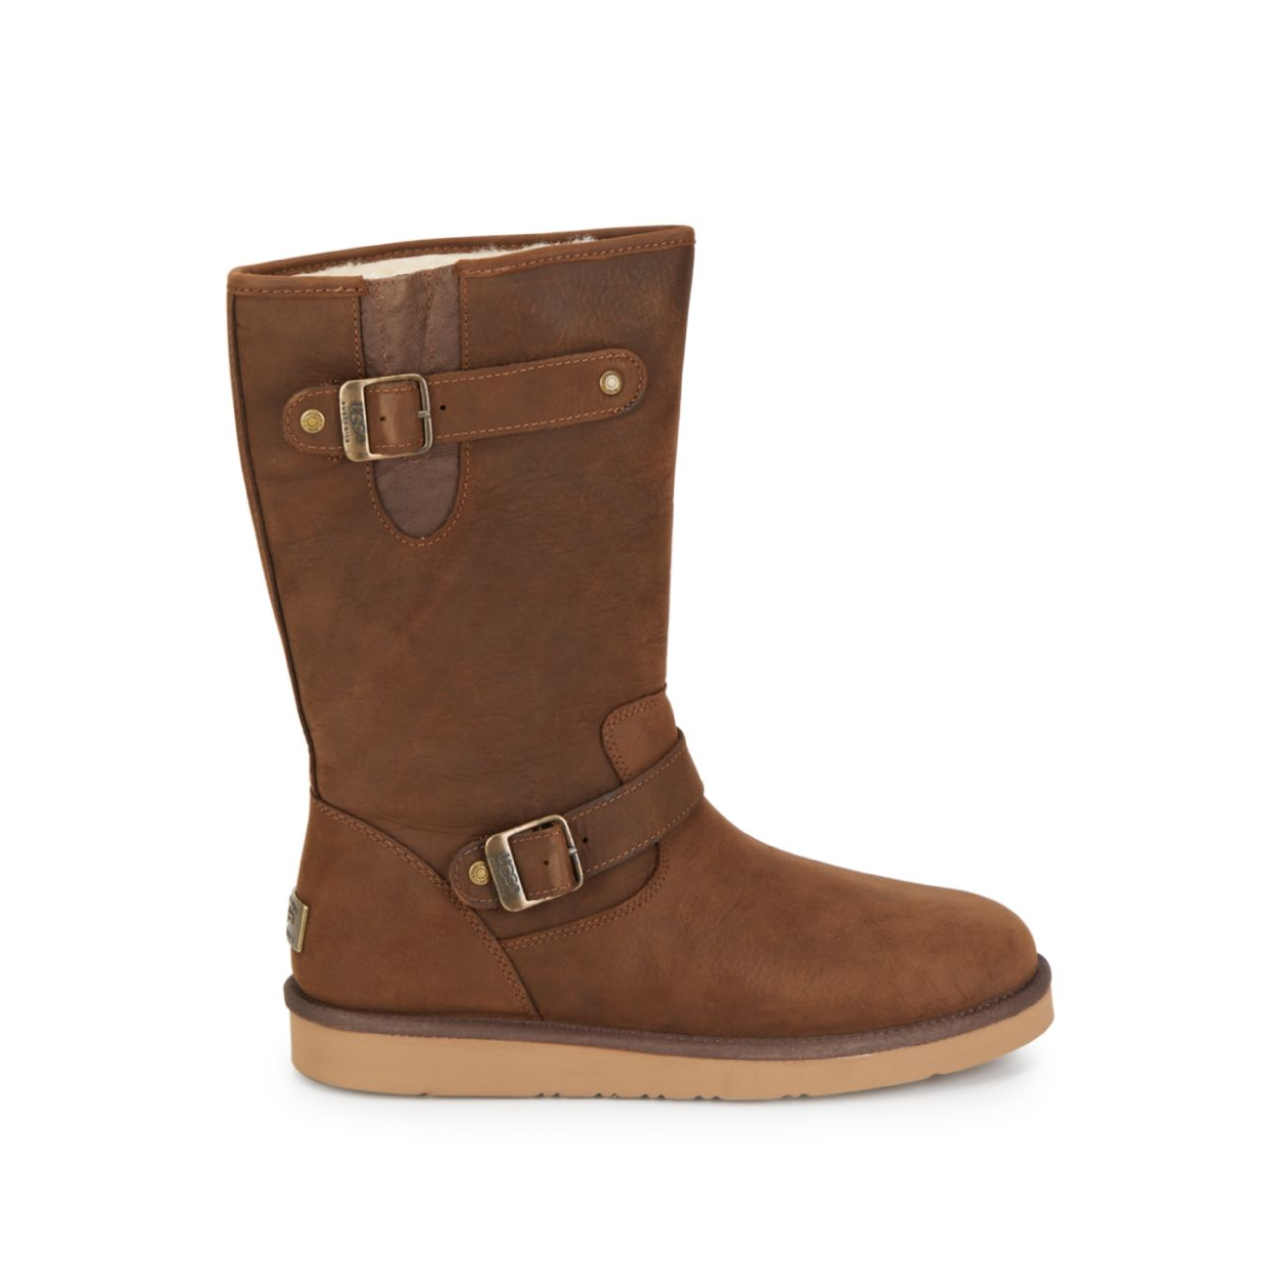 brown leather ugg boots uk